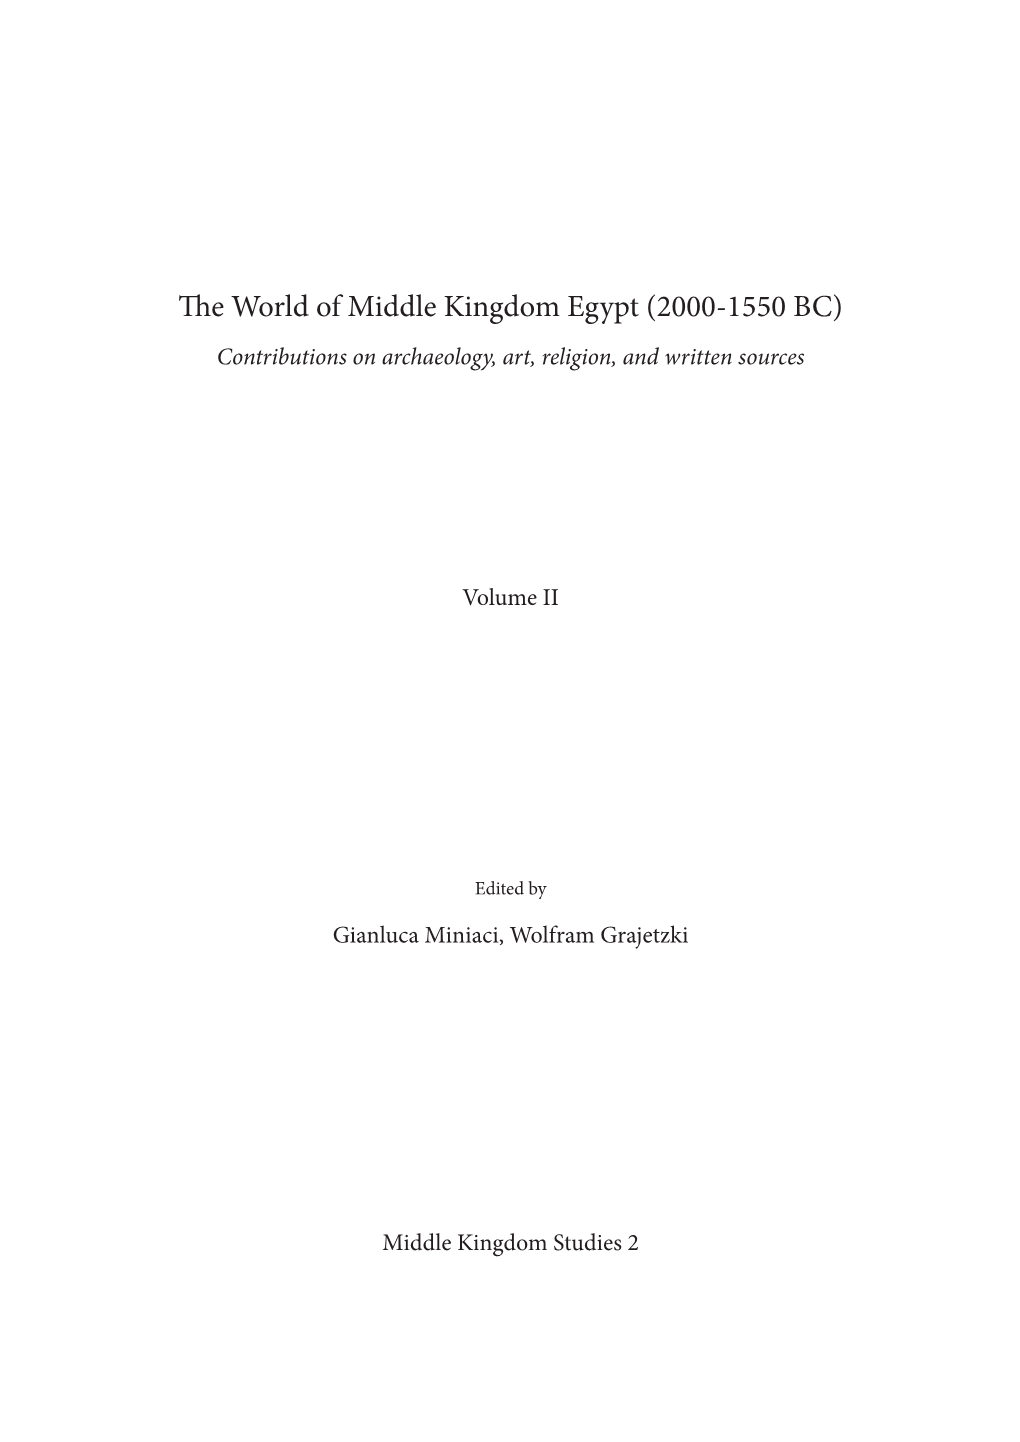 The World of Middle Kingdom Egypt (2000-1550